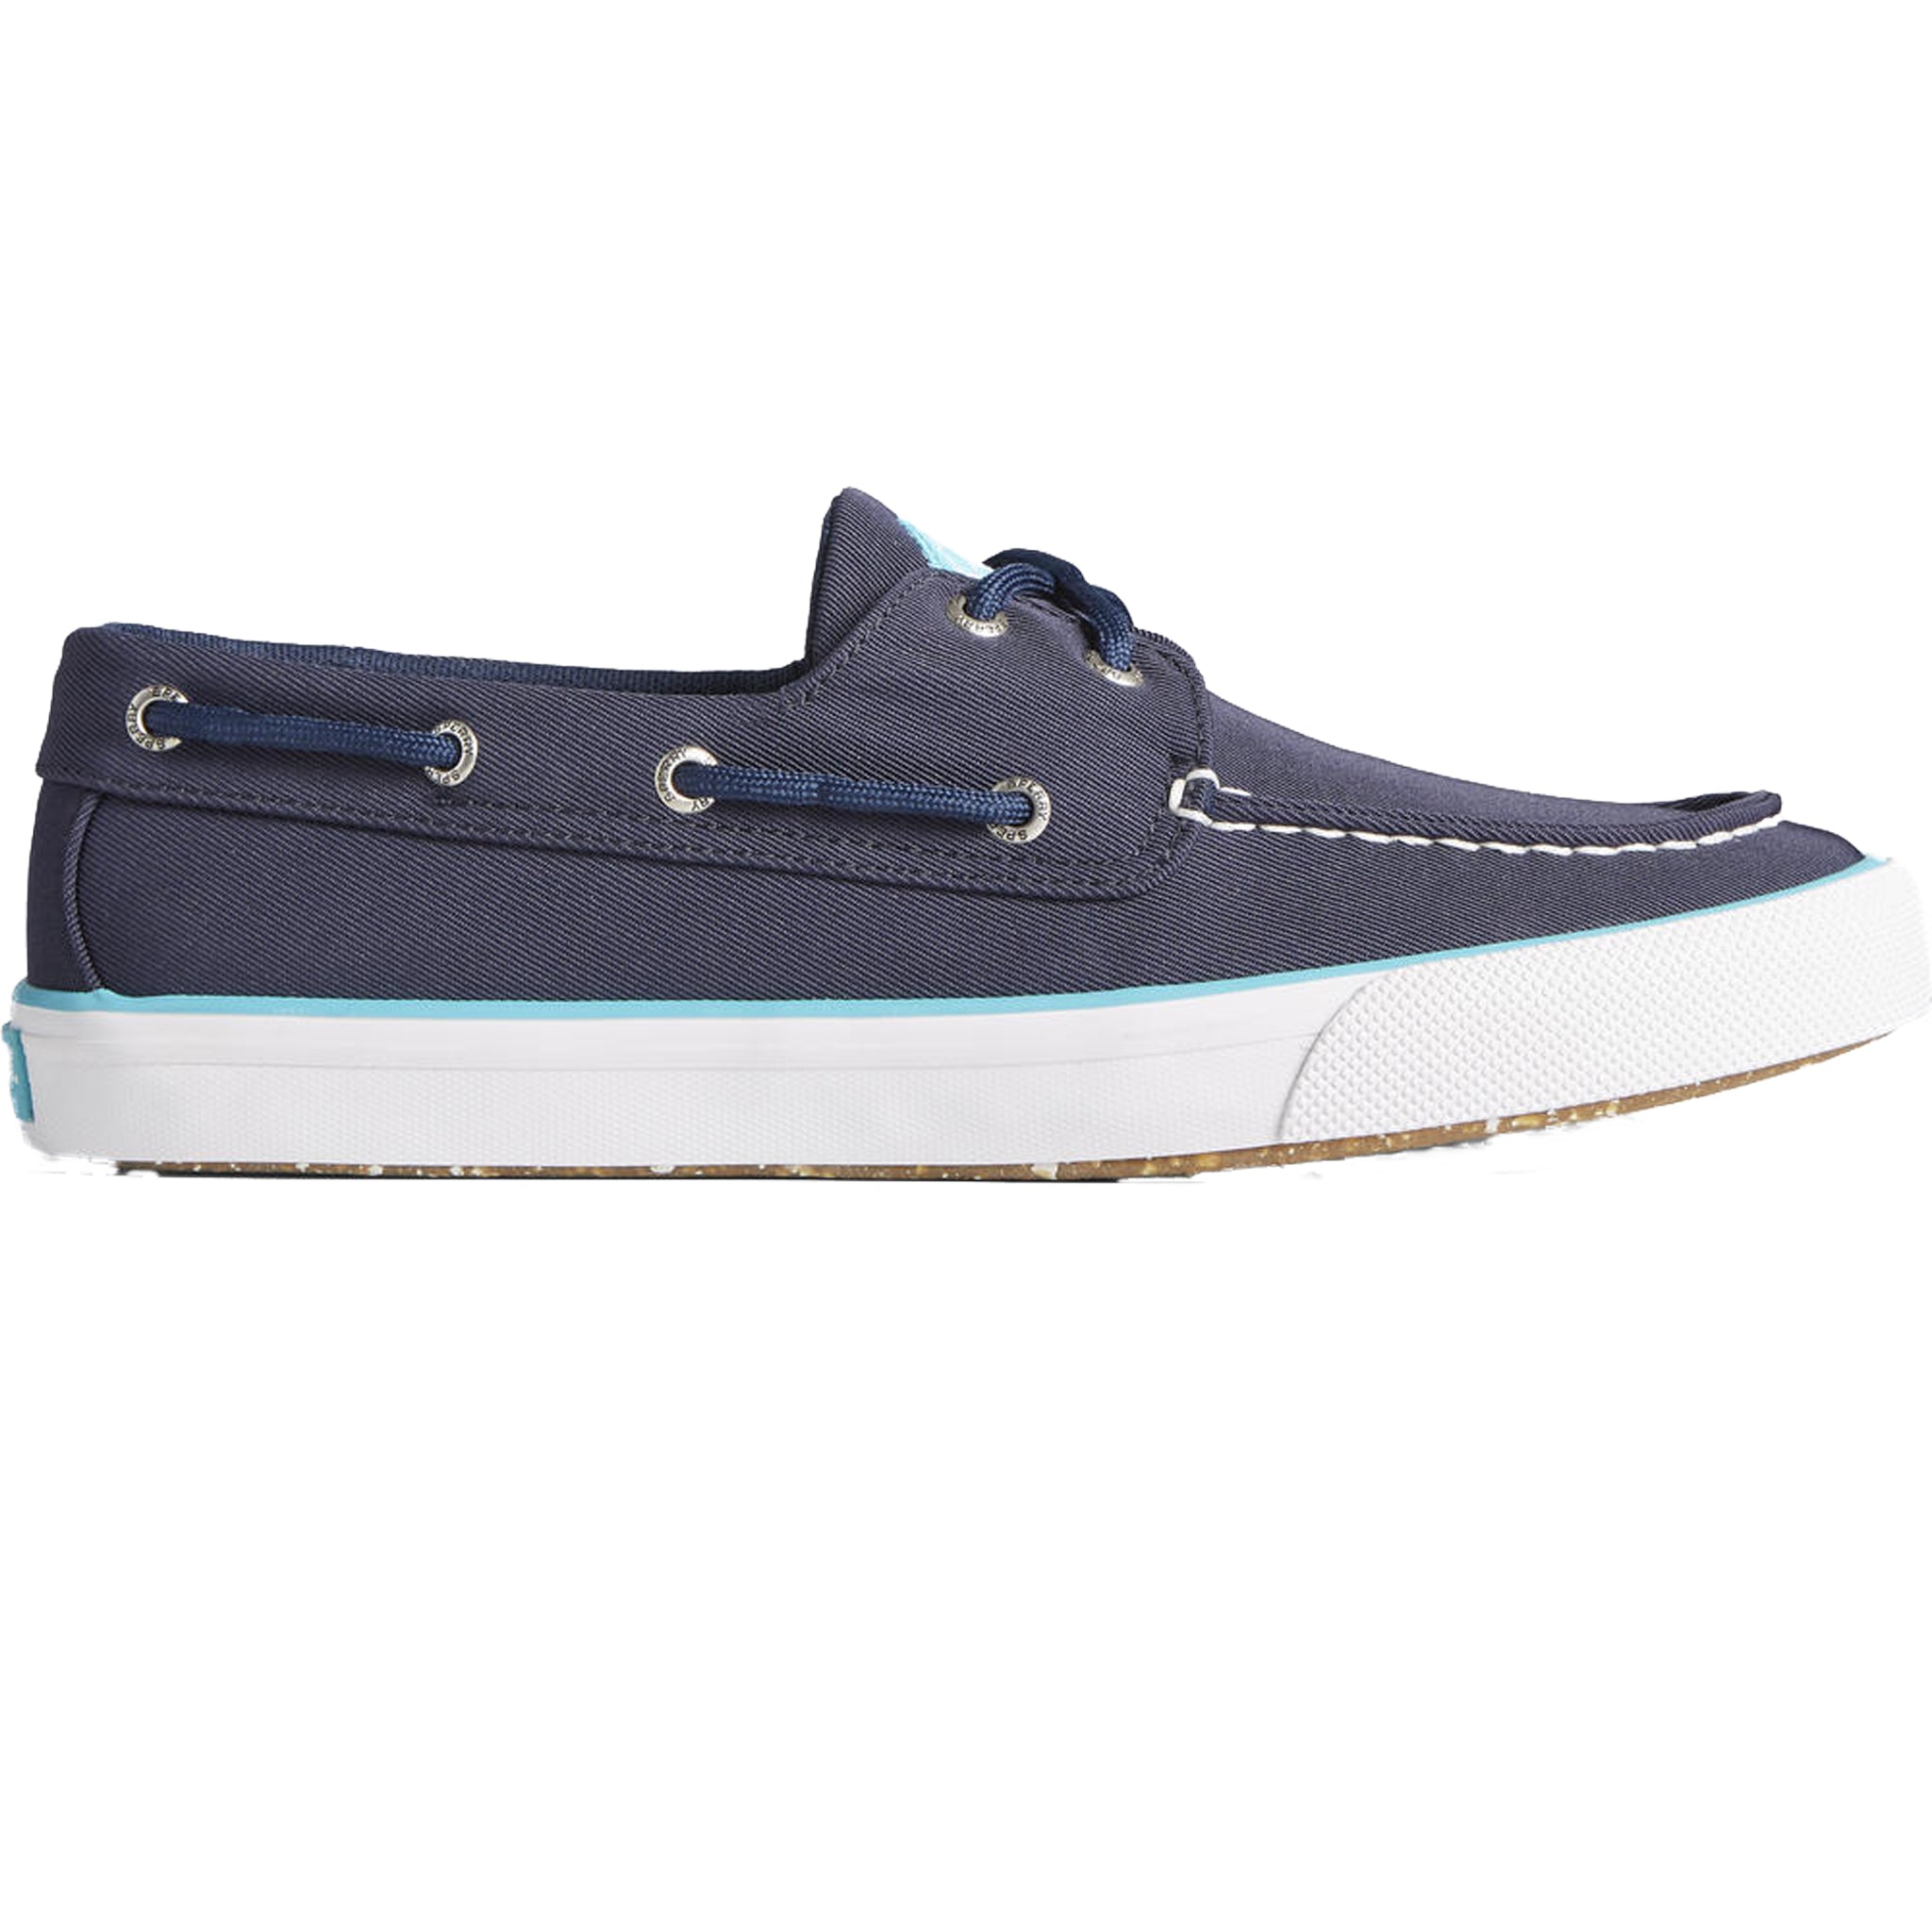 Chatham Bermuda II G2 Leather Boat Shoes, Navy/Seahorse at John Lewis &  Partners